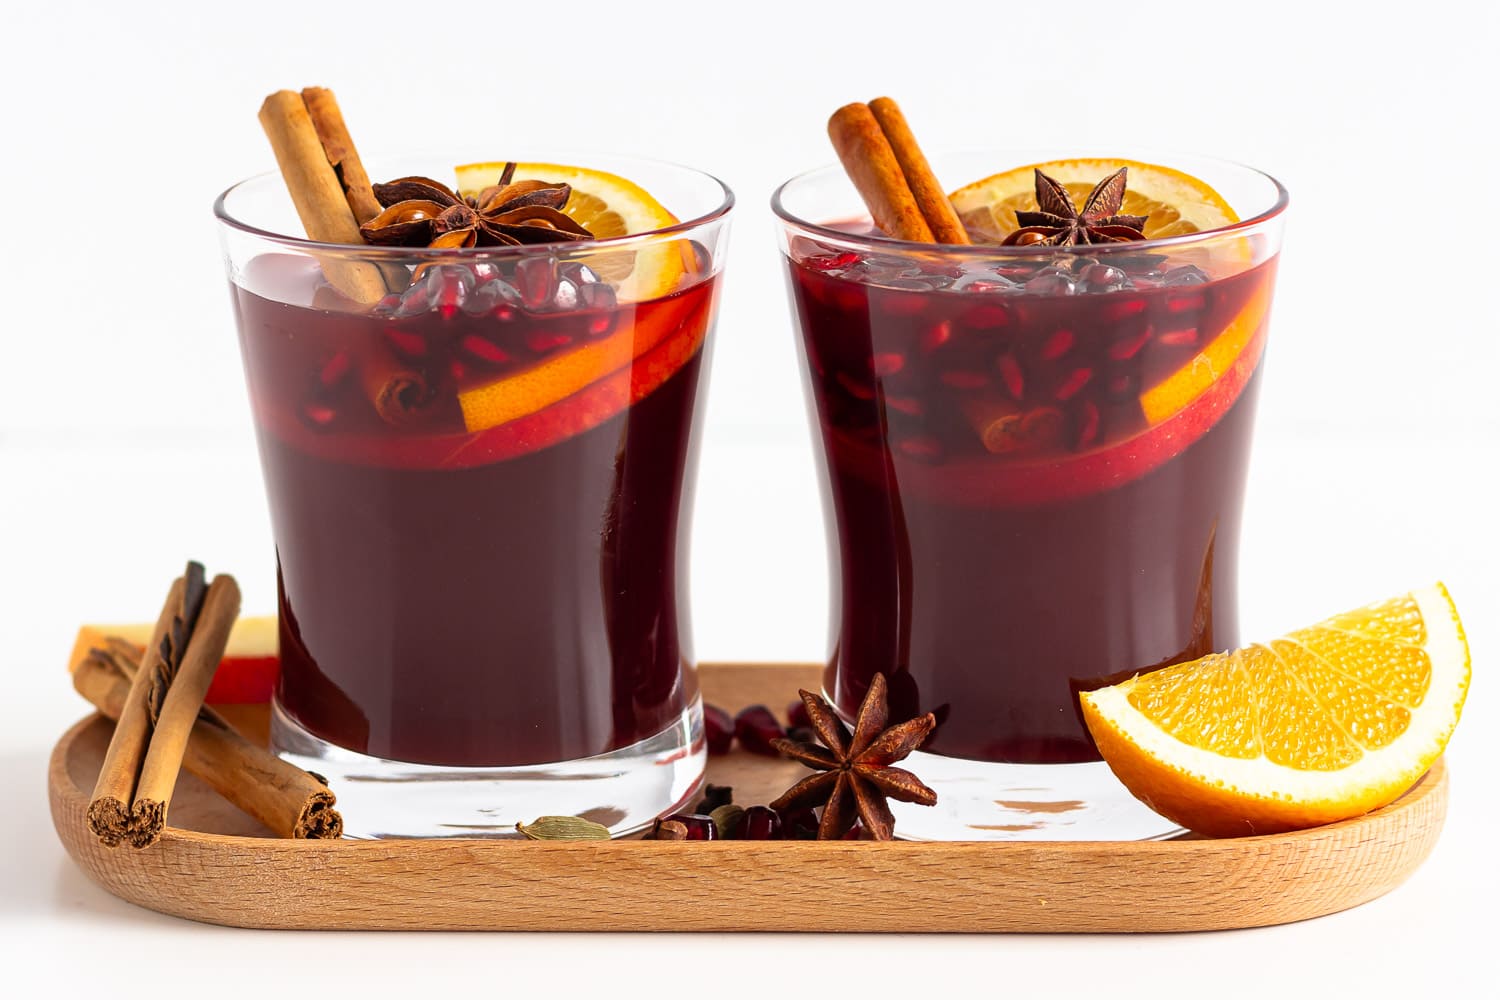 Two glasses of Kinderpunsch on a wooden tray garnished with orange slices, cinnamon sticks, star anise and pomegranate arils.